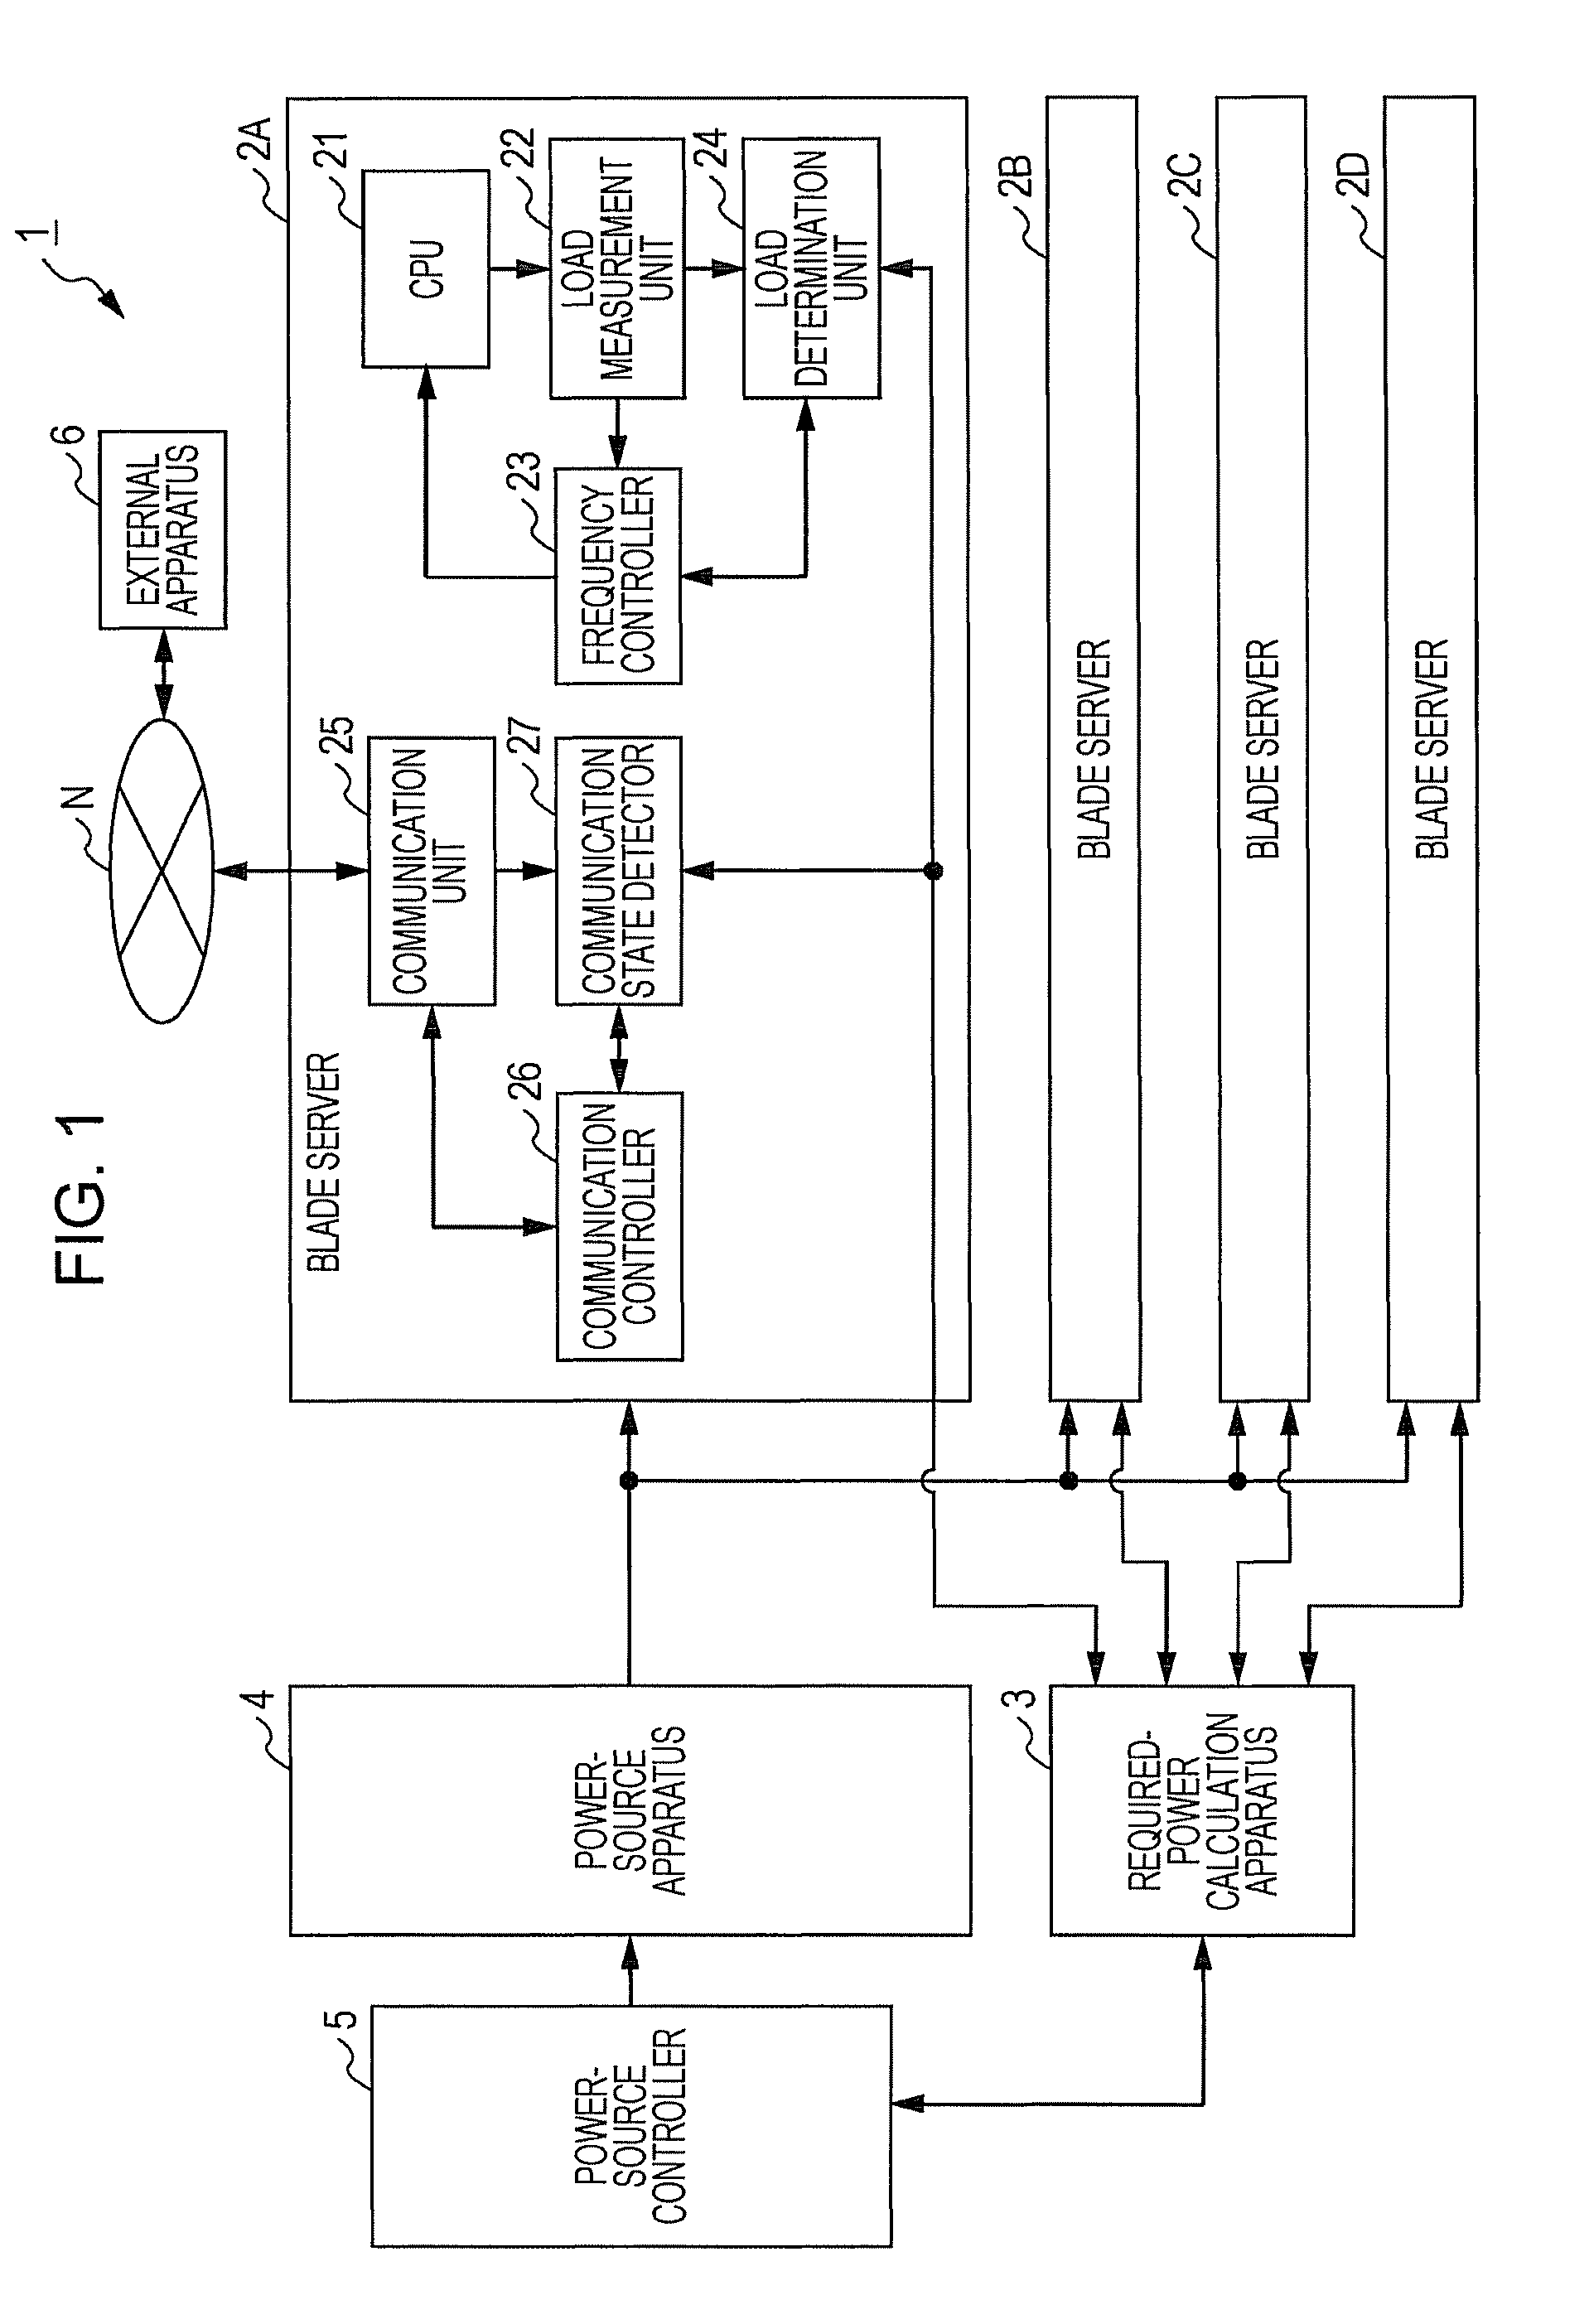 Power-source control system and method to supply and control power to an information processing apparatus